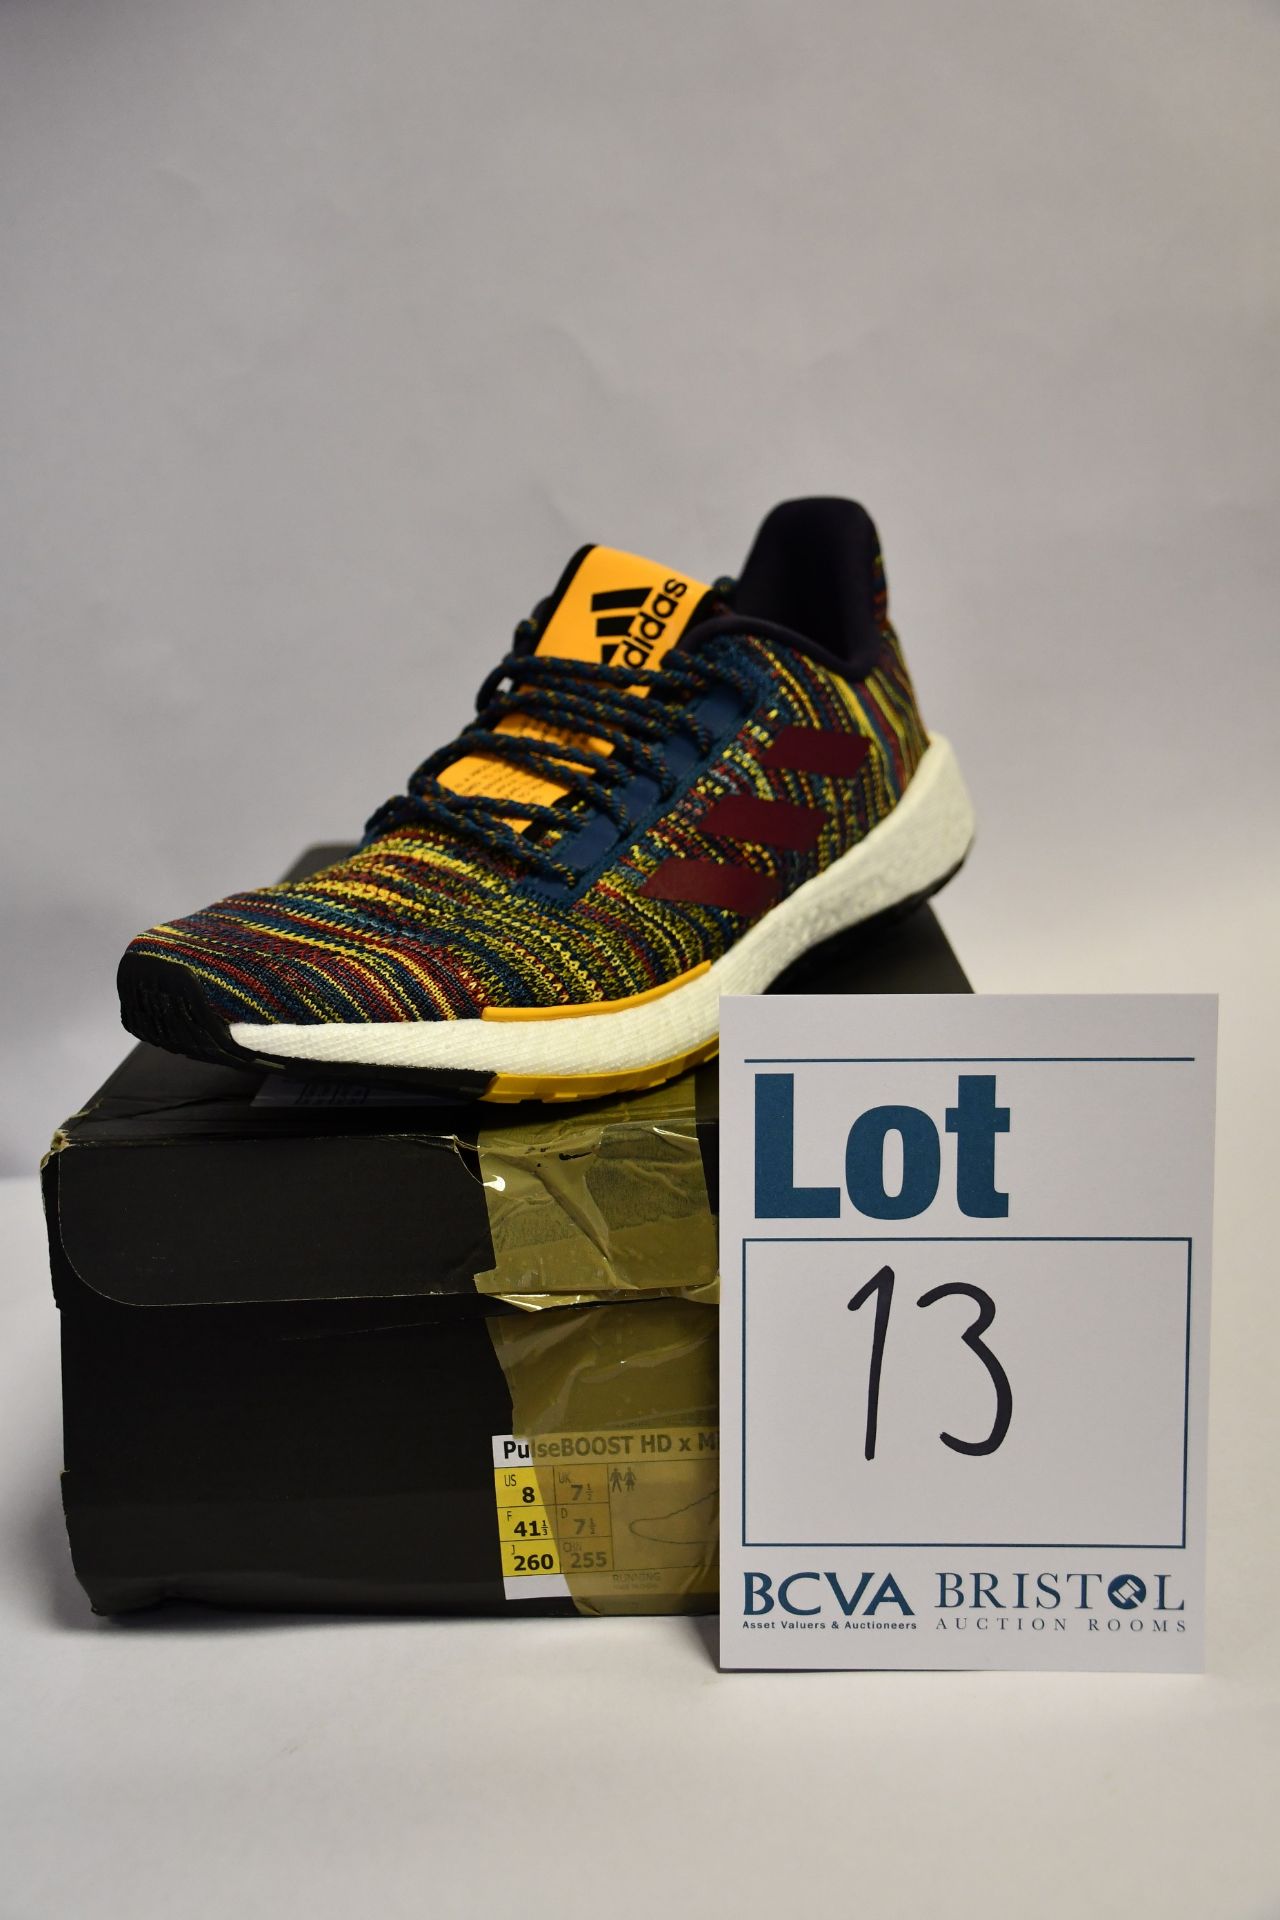 A pair of as new Adidas PulesBoost HD x Missoni trainers (UK 7.5).